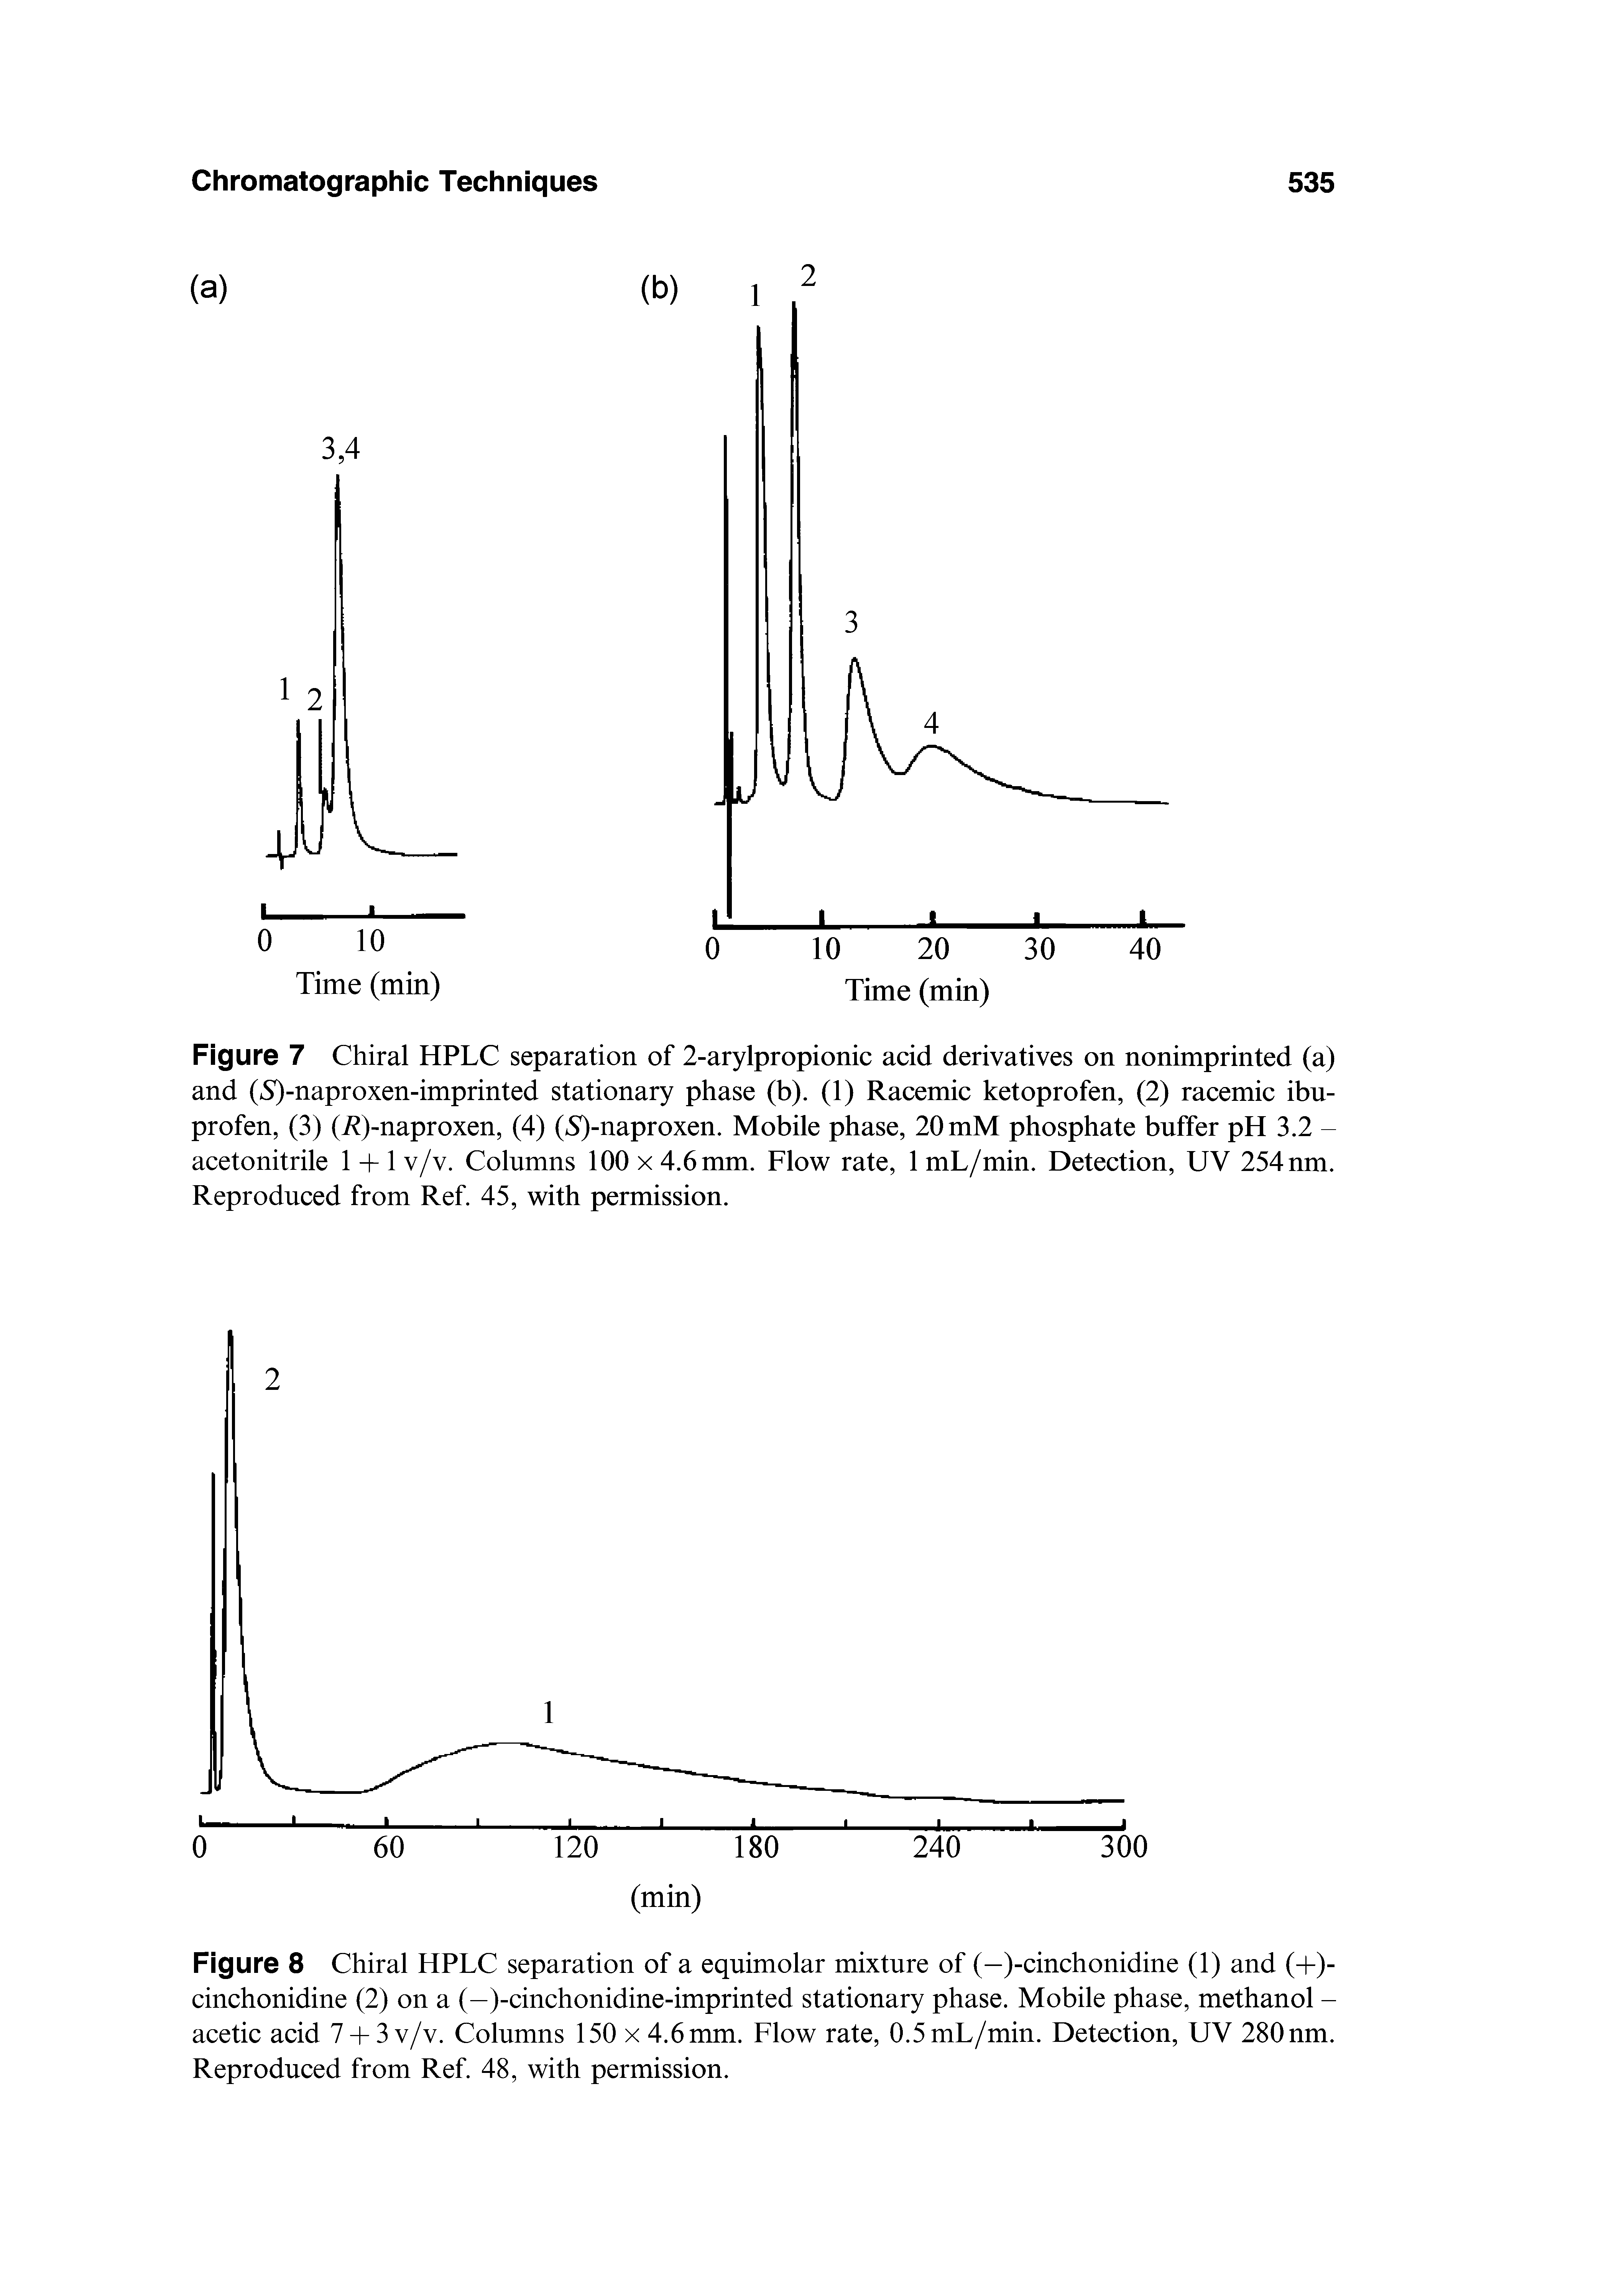 Figure 7 Chiral HPLC separation of 2-arylpropionic acid derivatives on nonimprinted (a) and (5)-naproxen-imprinted stationary phase (b). (1) Racemic ketoprofen, (2) racemic ibu-profen, (3) (R)-naproxen, (4) (5)-naproxen. Mobile phase, 20 mM phosphate buffer pH 3.2 -acetonitrile 1 + lv/v. Columns 100 x 4.6 mm. Flow rate, ImL/min. Detection, UV 254 nm. Reproduced from Ref. 45, with permission.